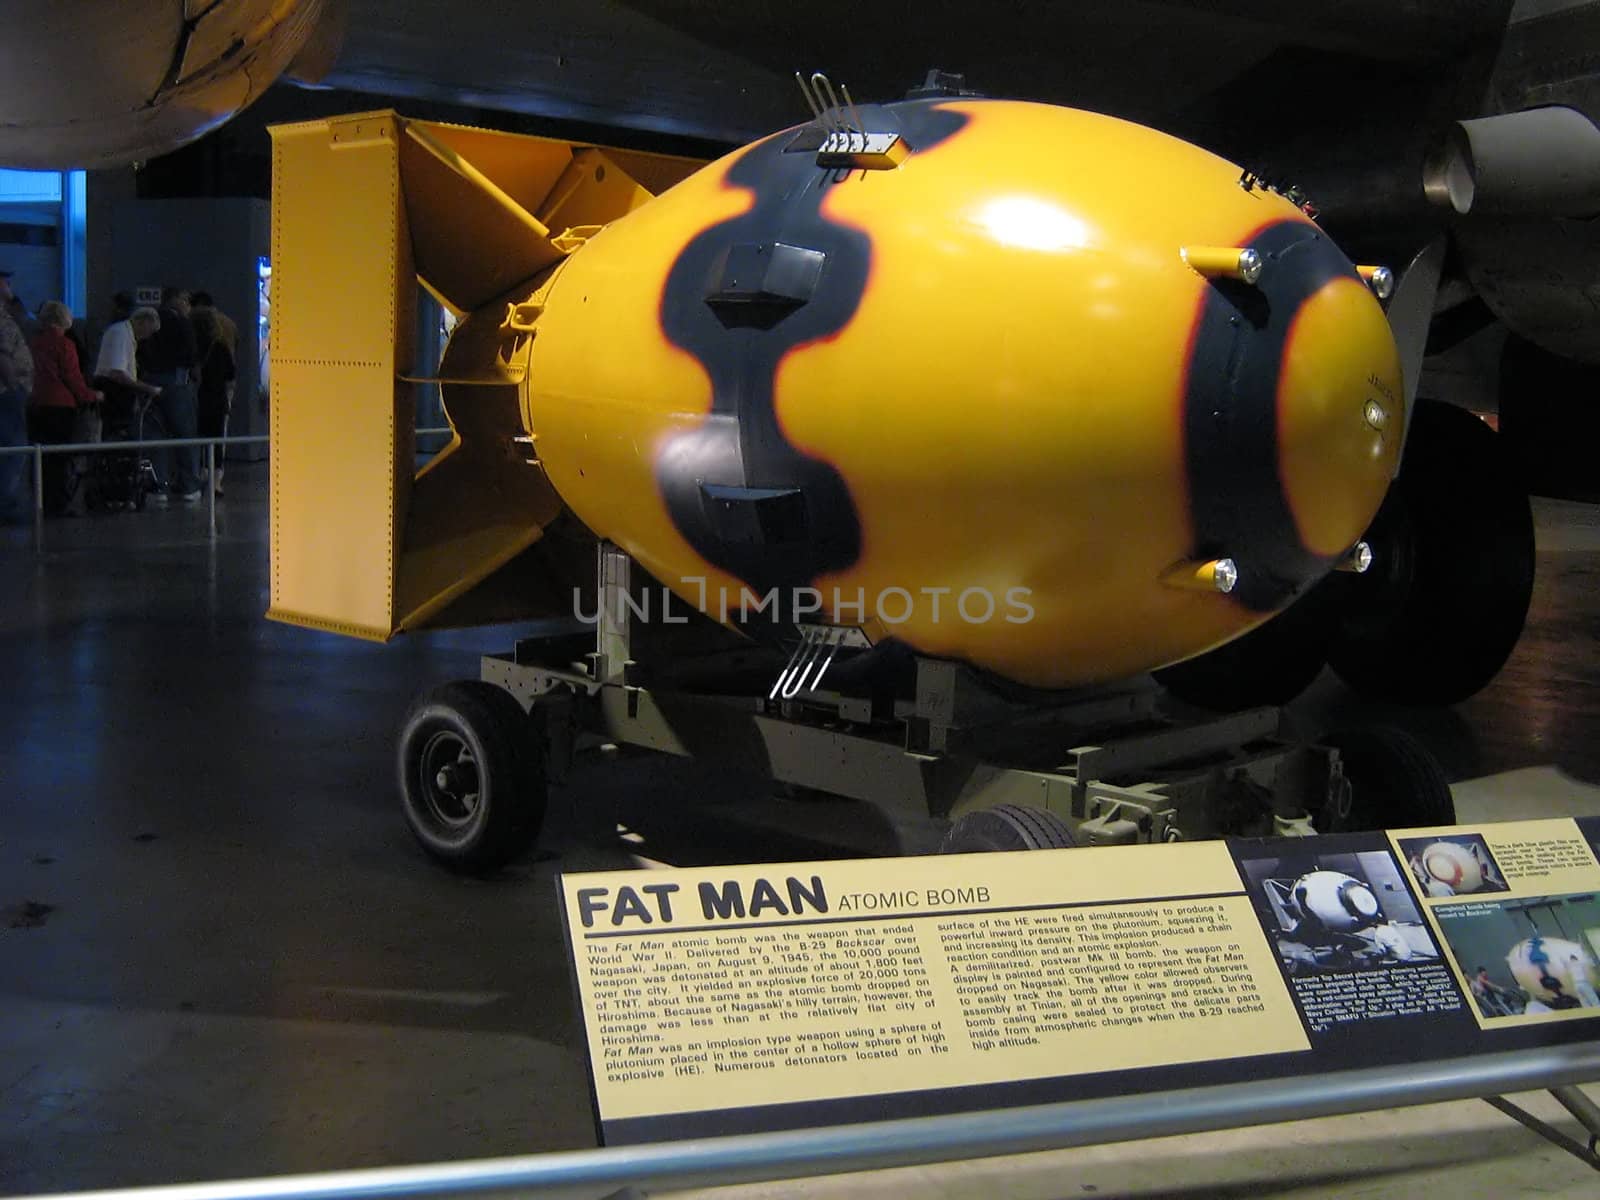 A photograph of a replica bomb used by military aircraft.